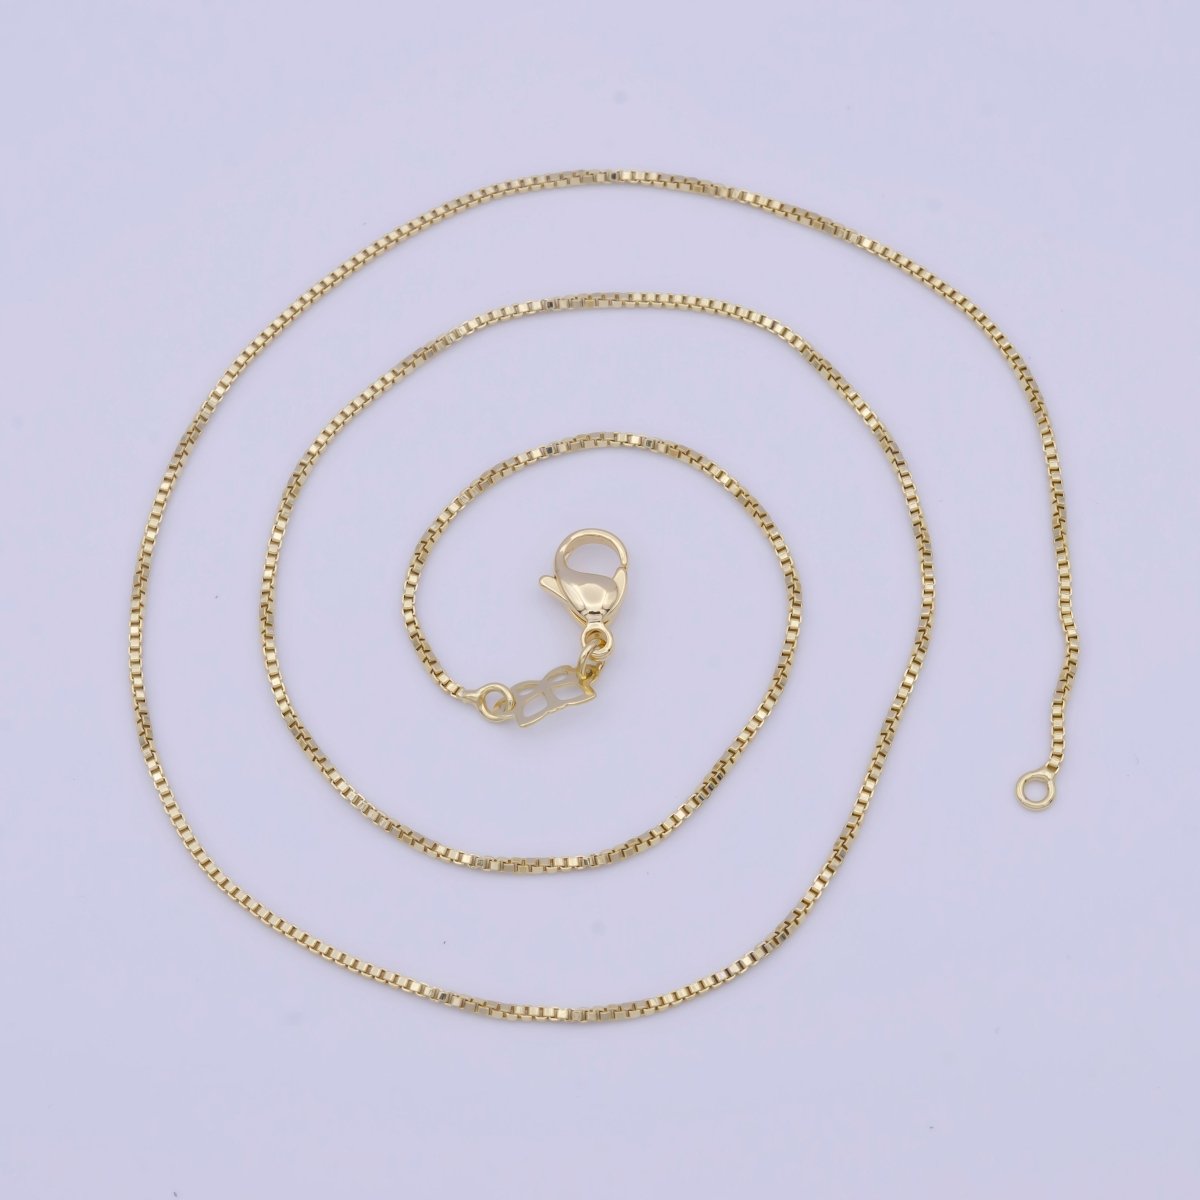 Dainty Box Chain 18" Ready to Wear 14k Gold Filled Box Chain with Lobster Clasp, Simple Everyday Layering Necklace | WA-1115 Clearance Pricing - DLUXCA